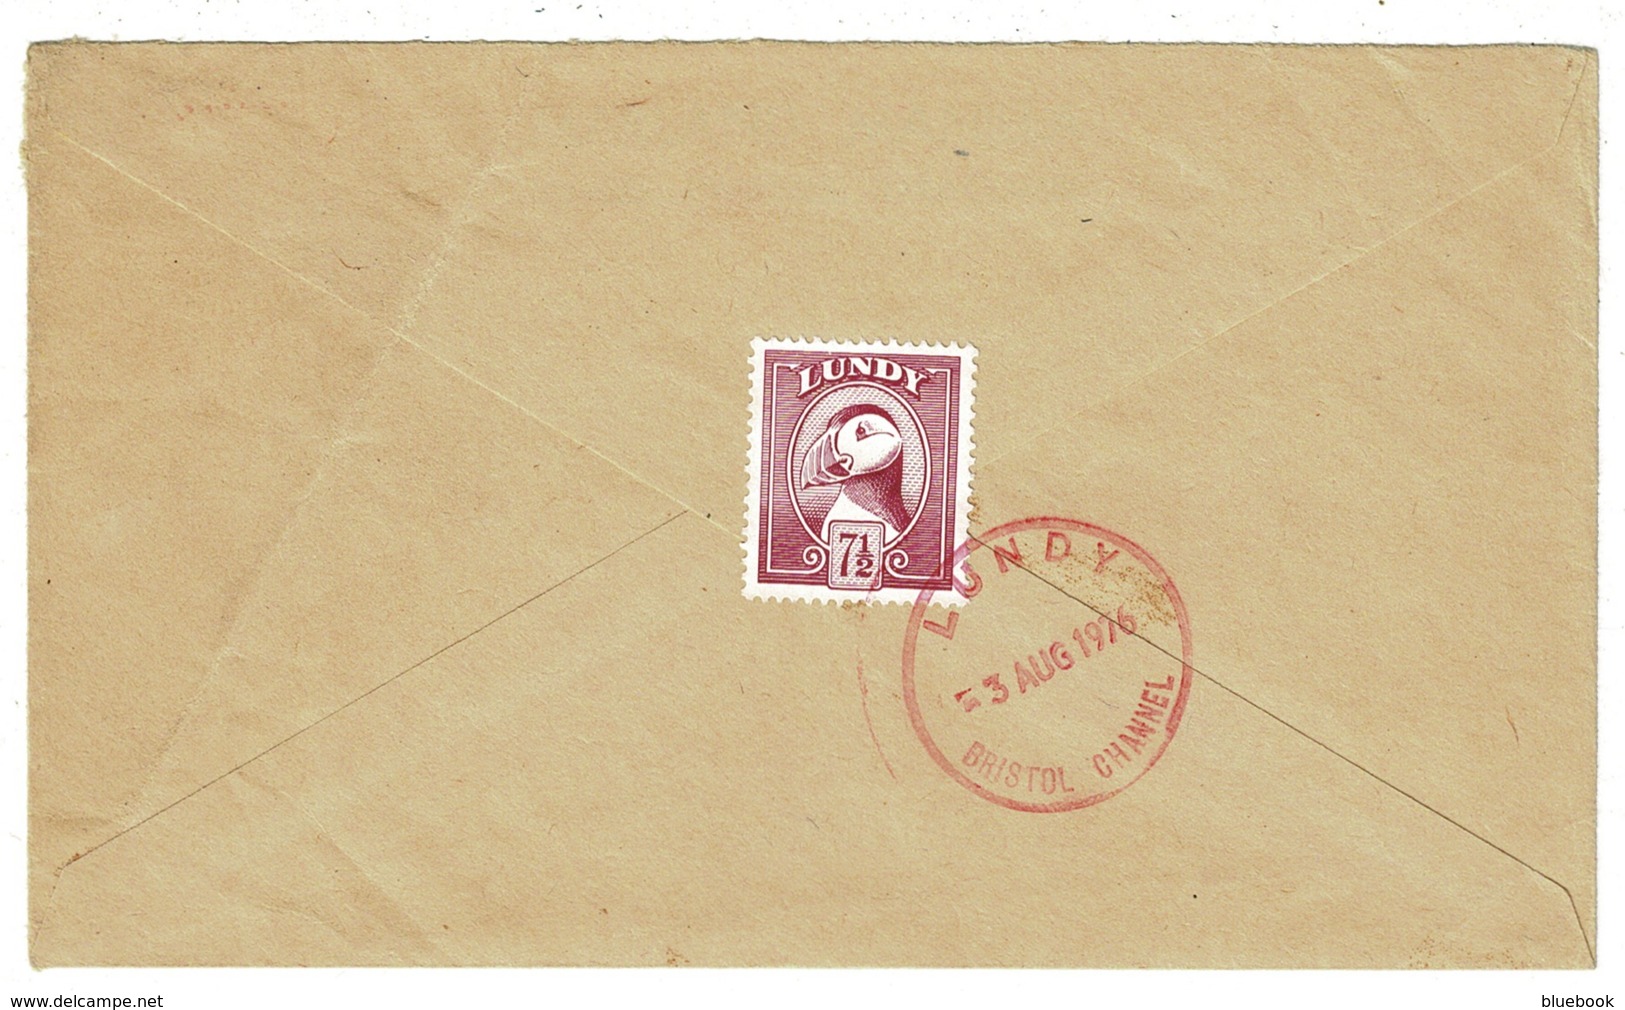 Ref 1307 - 1976 Lundy Commercial Cover - Lundy Ilfracombe Meter Mark - 7 1/2 Puffin Stamp - Local Issues